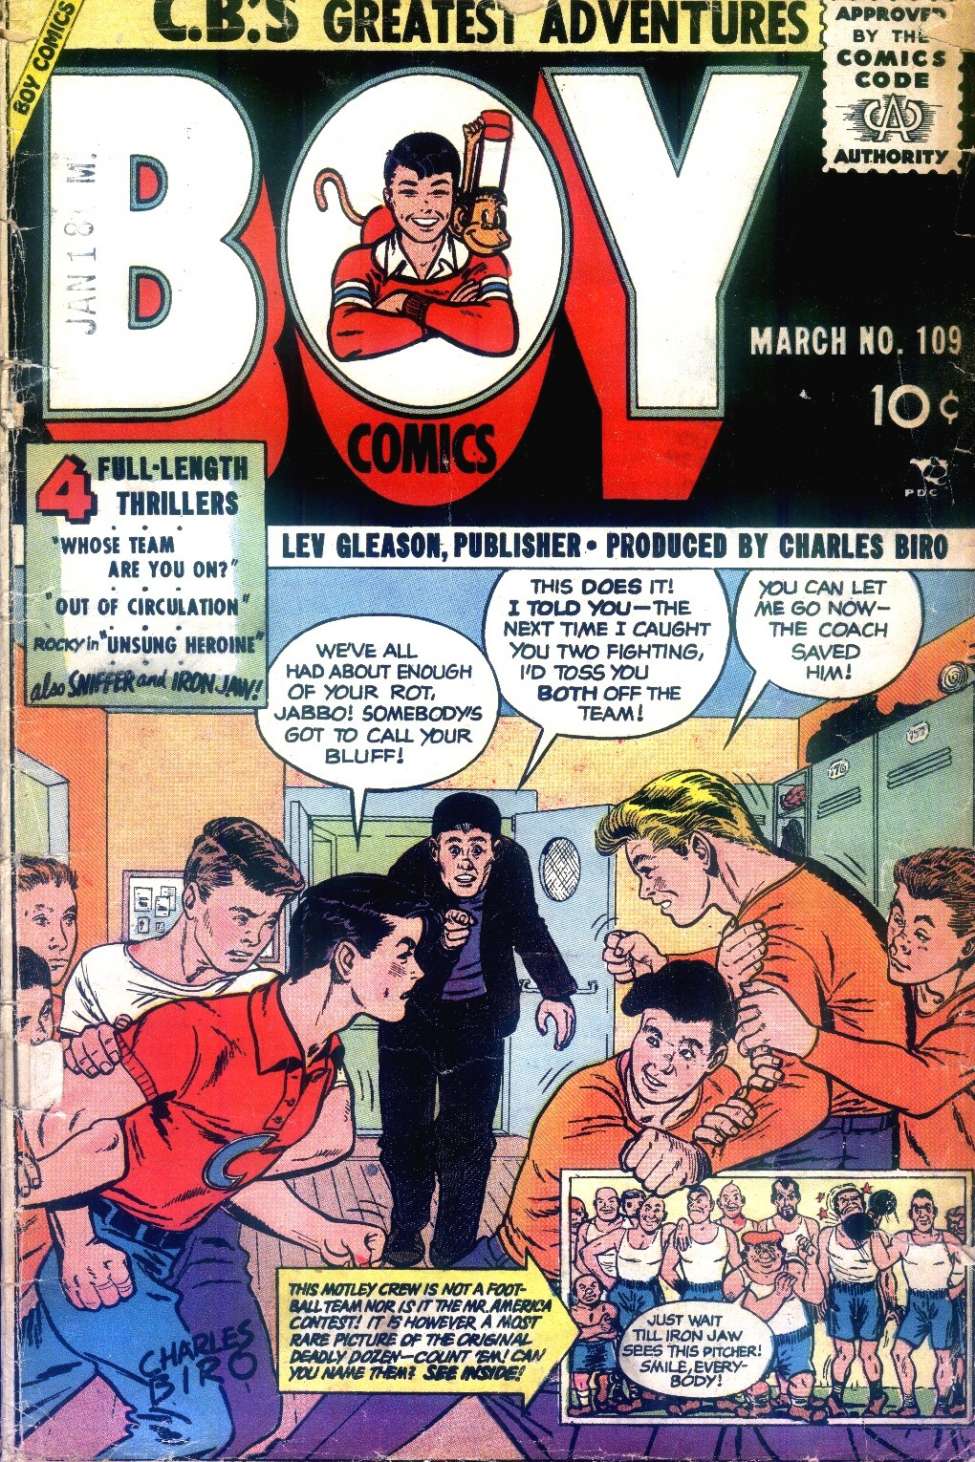 Book Cover For Boy Comics 109